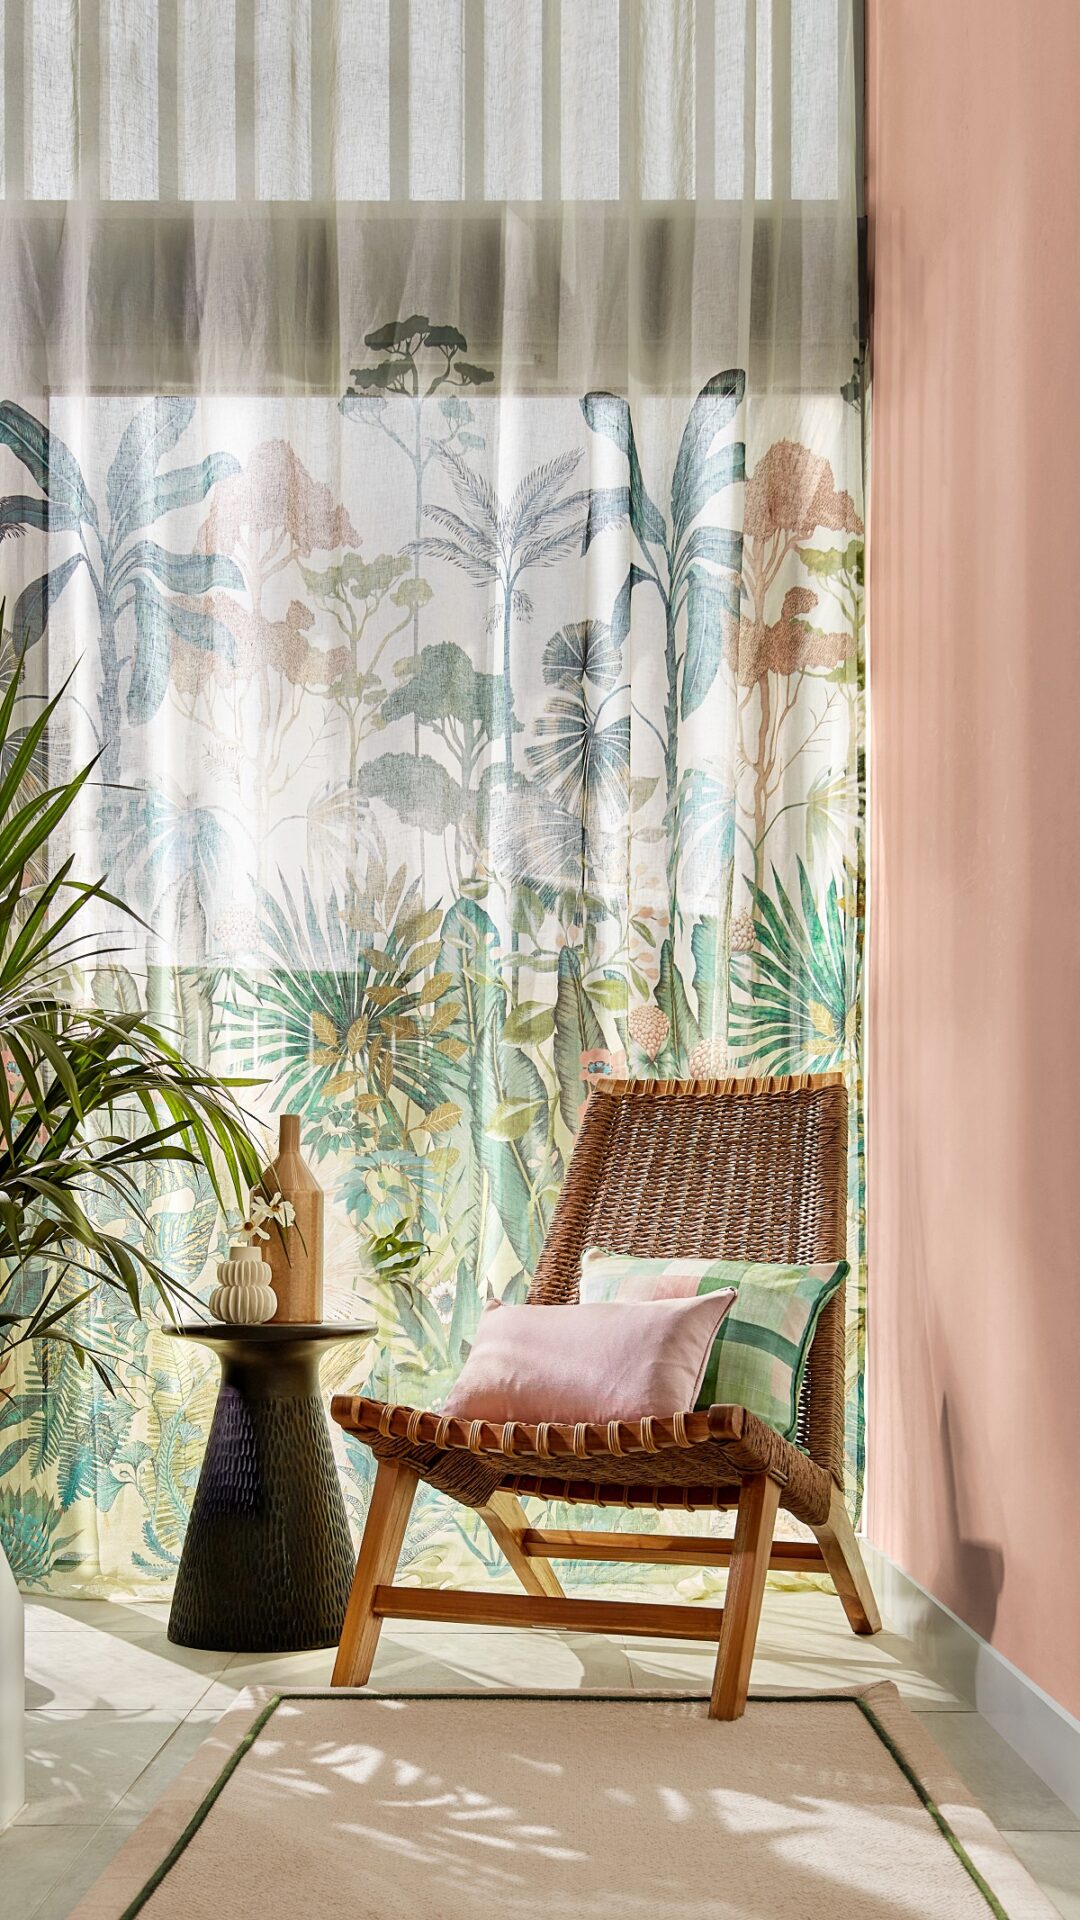 wooden chair and plants in a hallway in front of a window with sheer curtains with tropical plant pattern